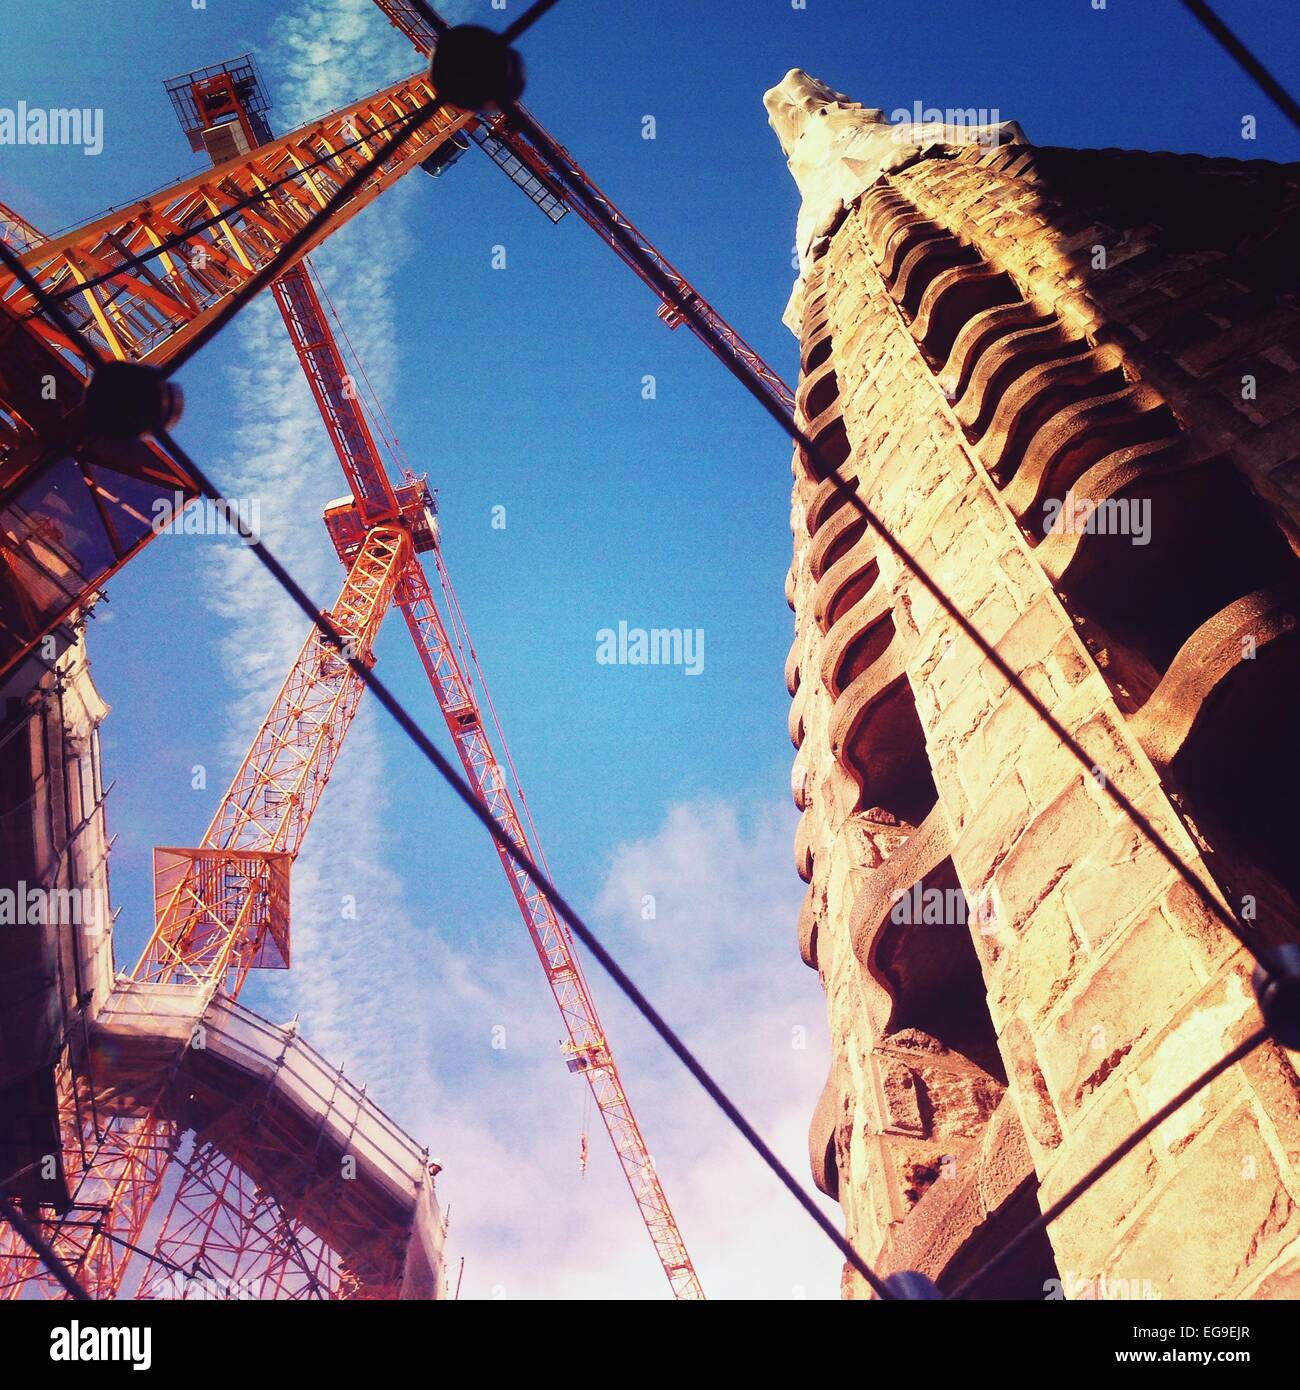 Spain, Catalonia, Barcelona, View from below of Sagrada Familia still being built Stock Photo